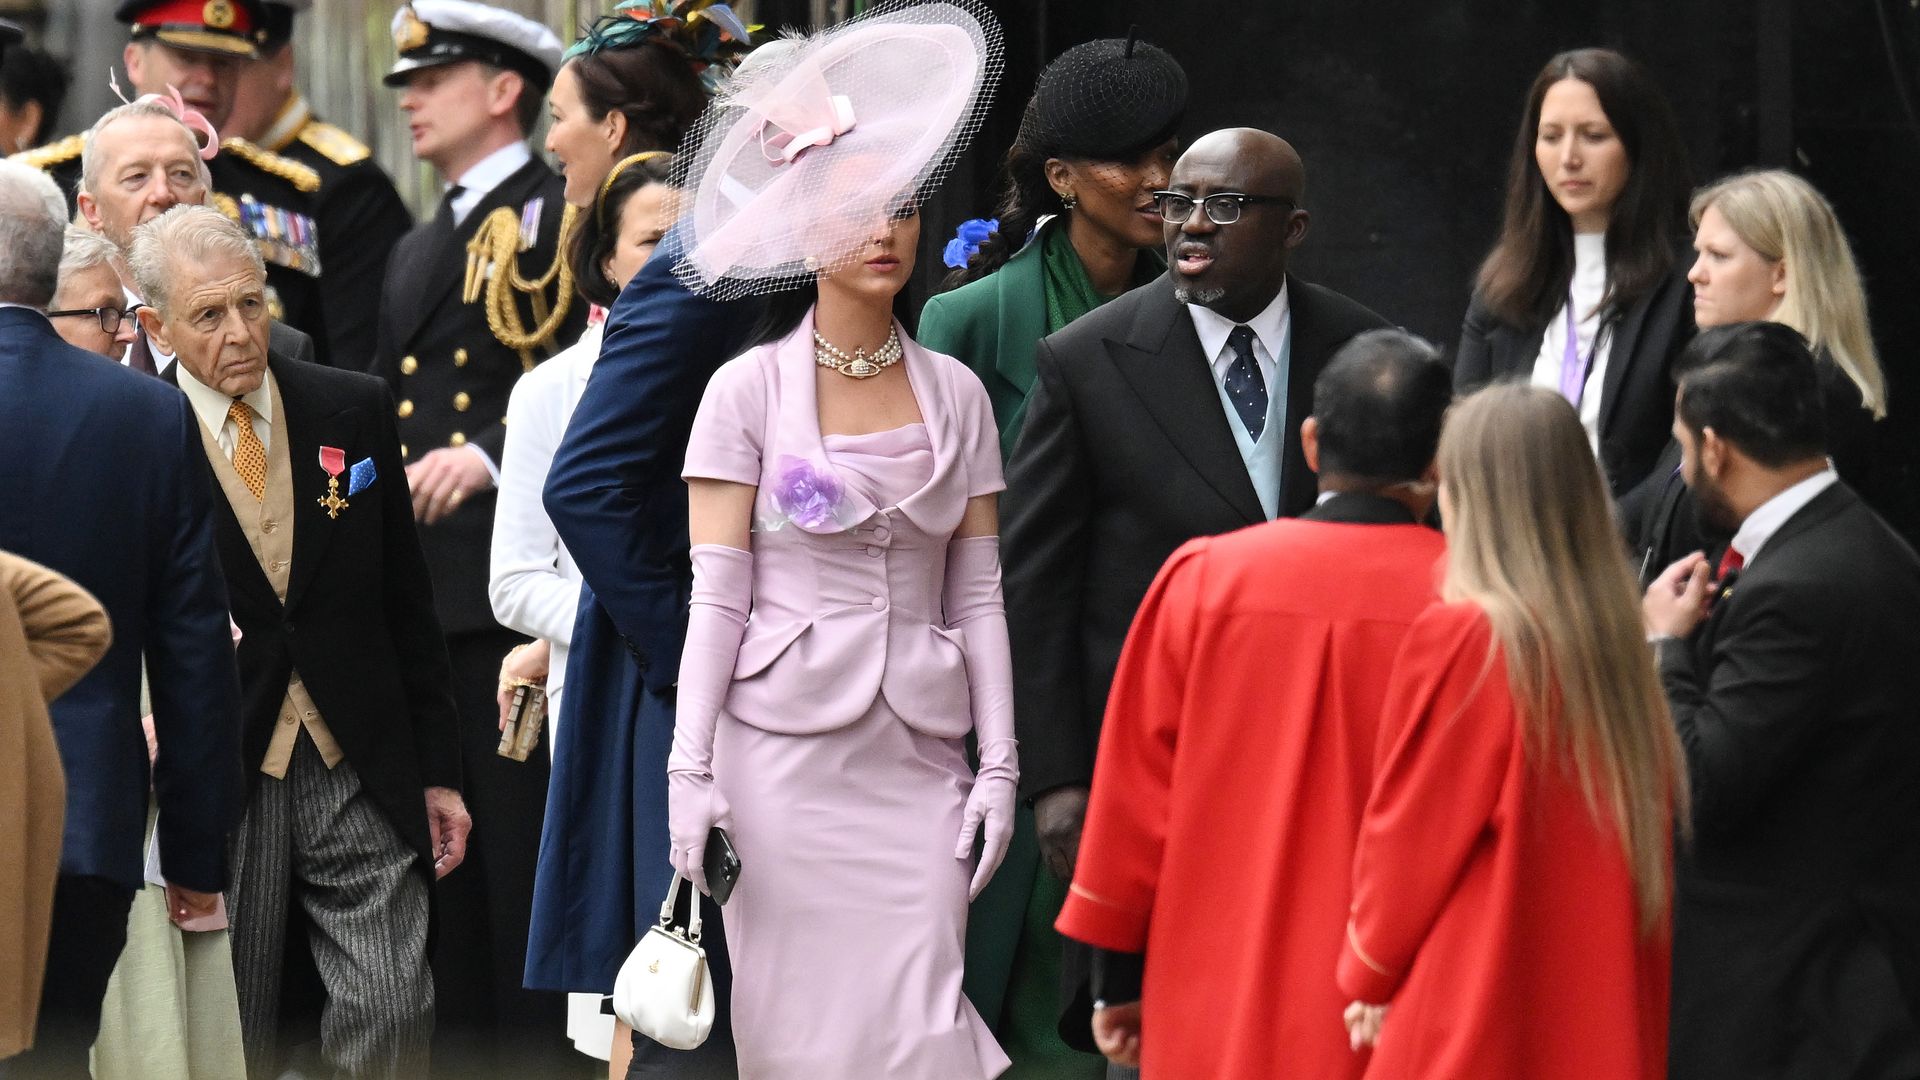 Edward Enninful and Katy Perry arrived together at Westminster Abbey 